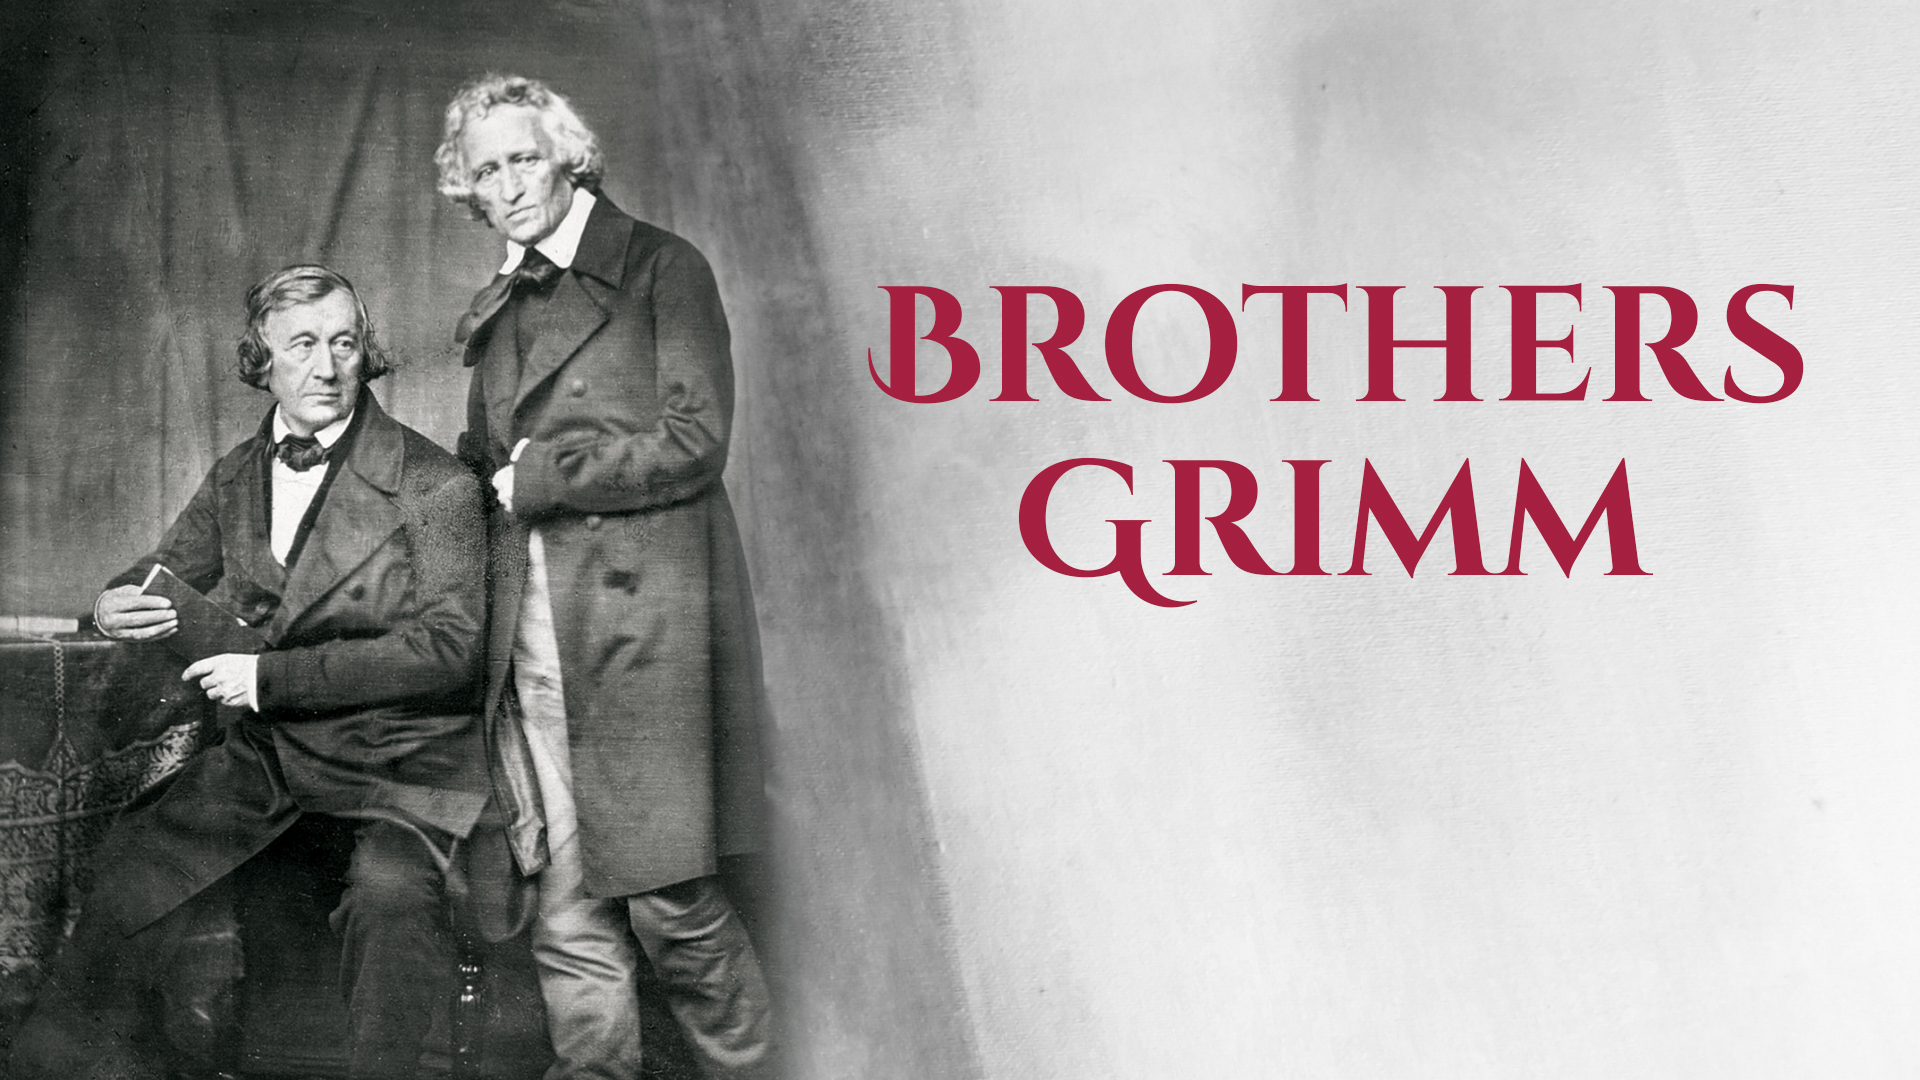 The Brothers Grimm - Biography and Works